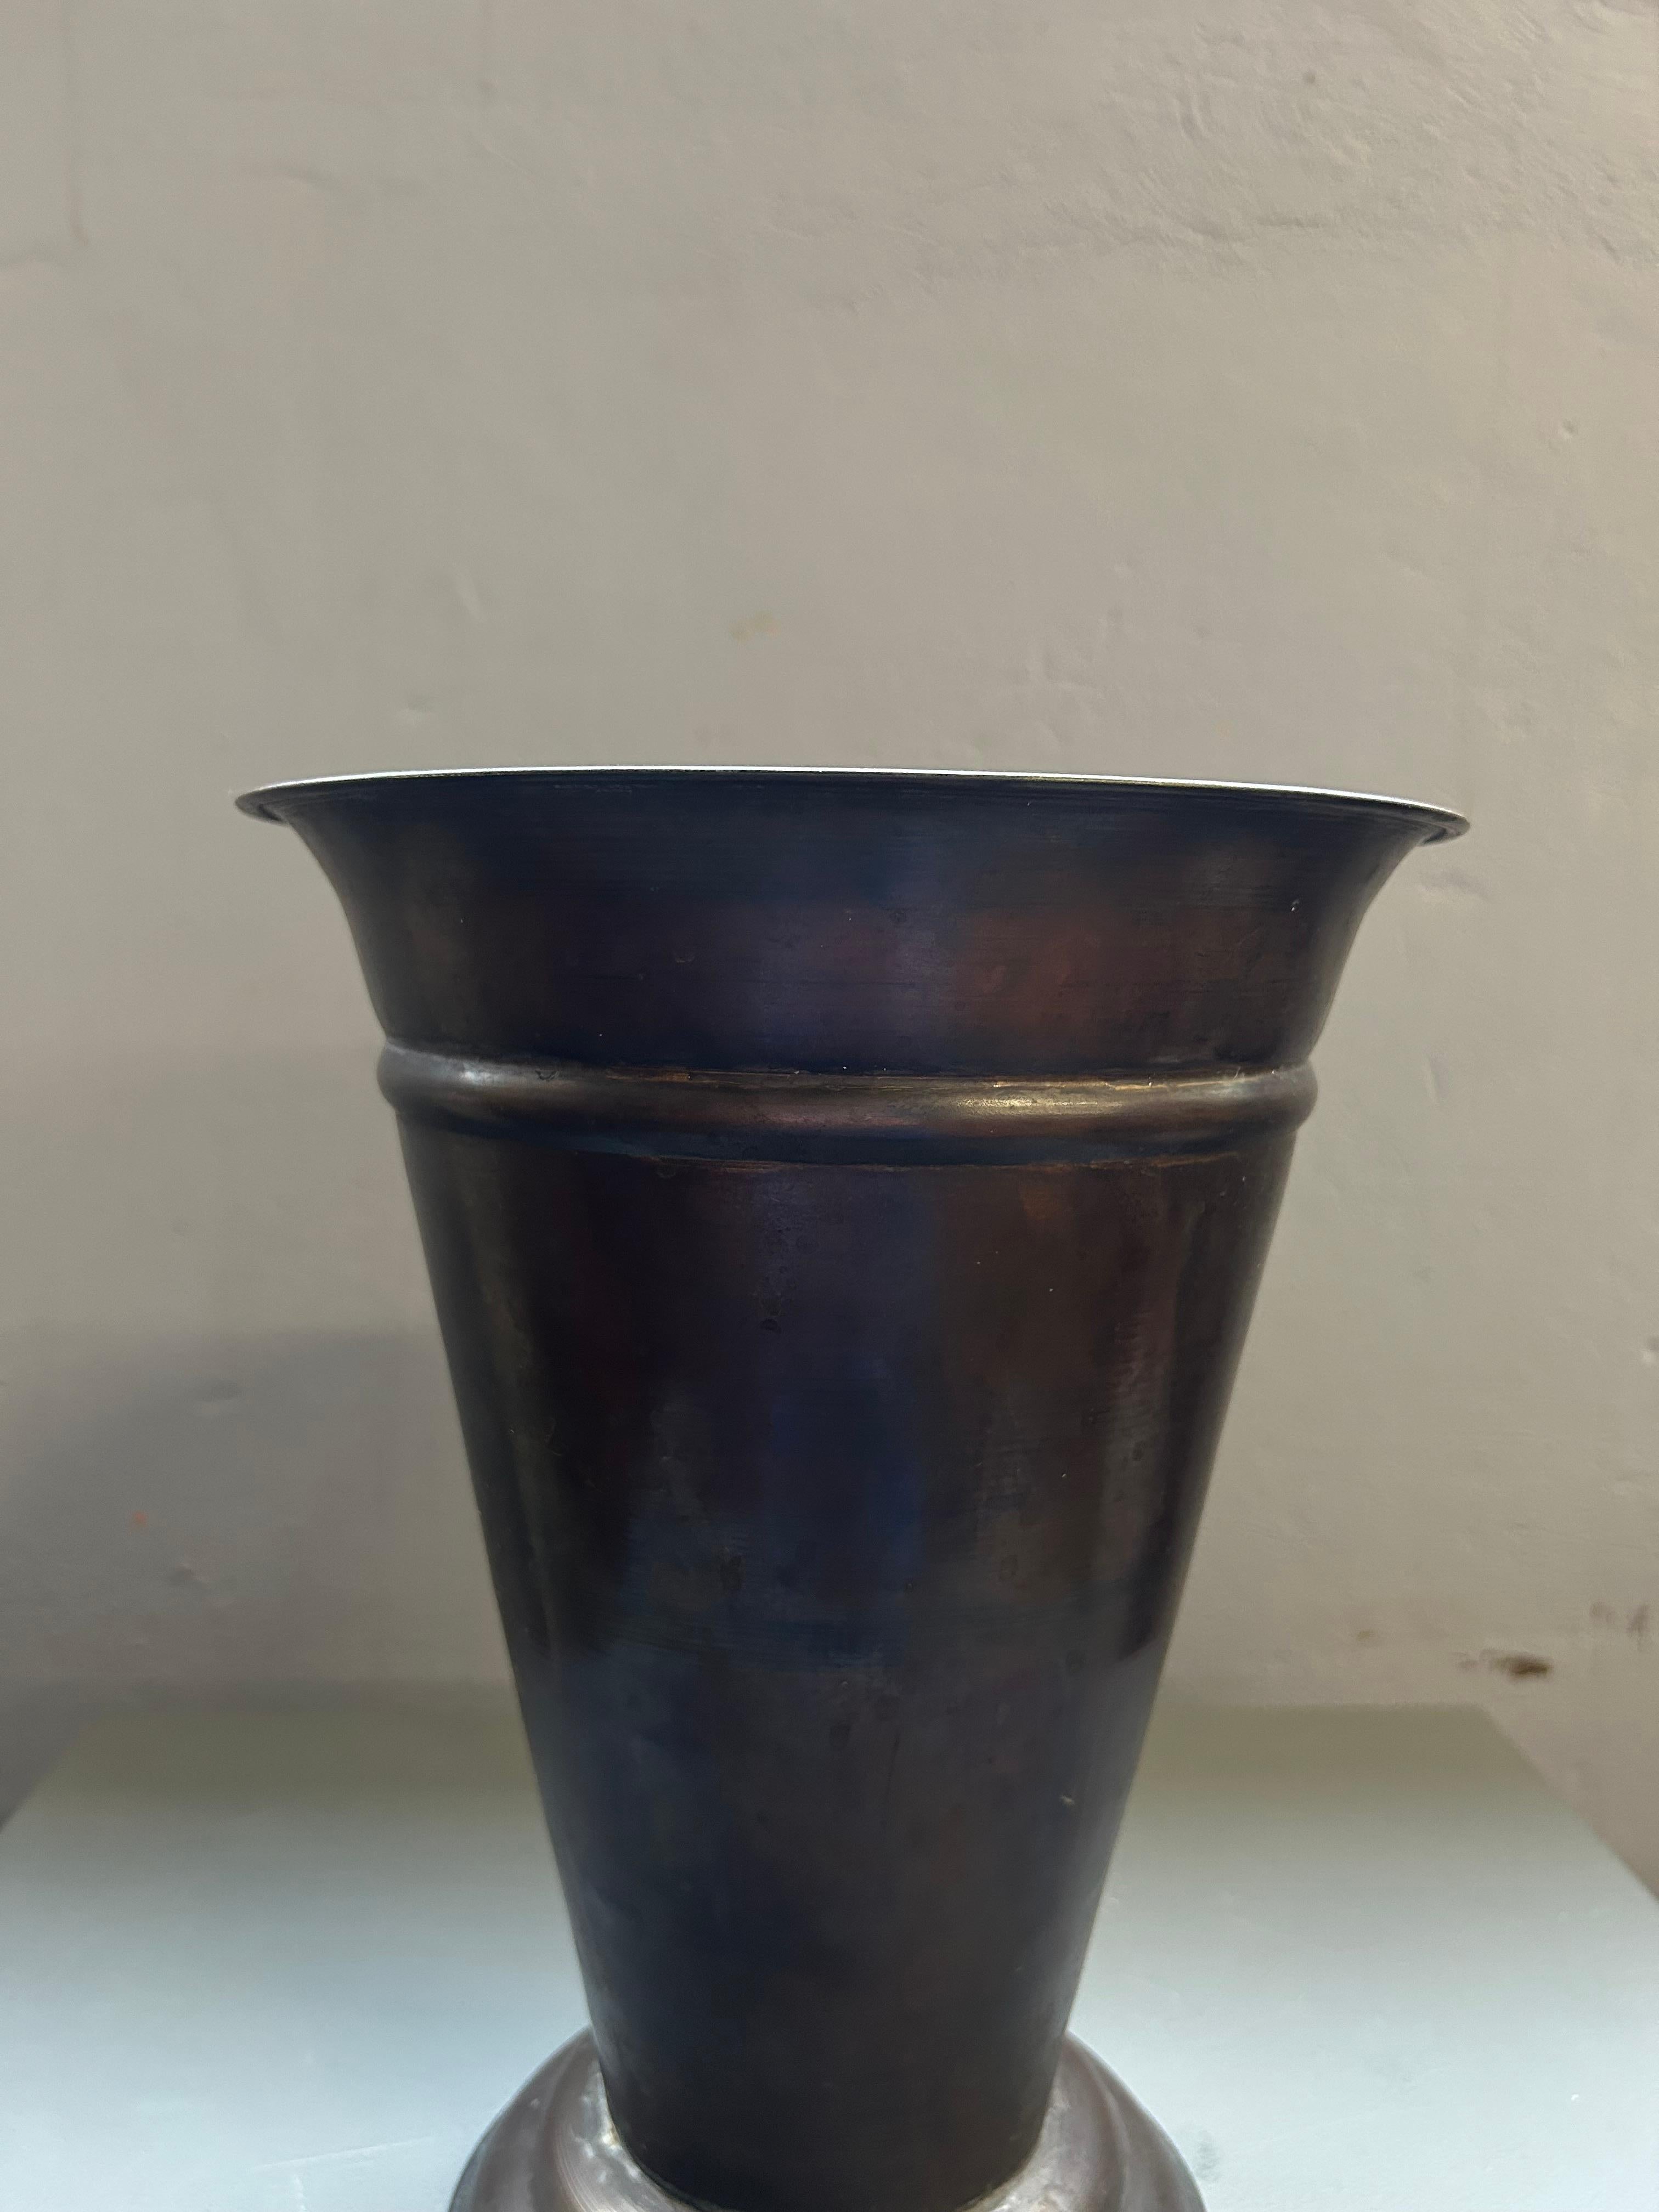 Rare big Art Deco decorative patinaed alloyed bronze urn made by a skilled craftsman in Denmark in the late 1930’s.

The urn is the perfect piece for your favorite flowers or bunch of branches.

The urn is the perfect detail for any style of